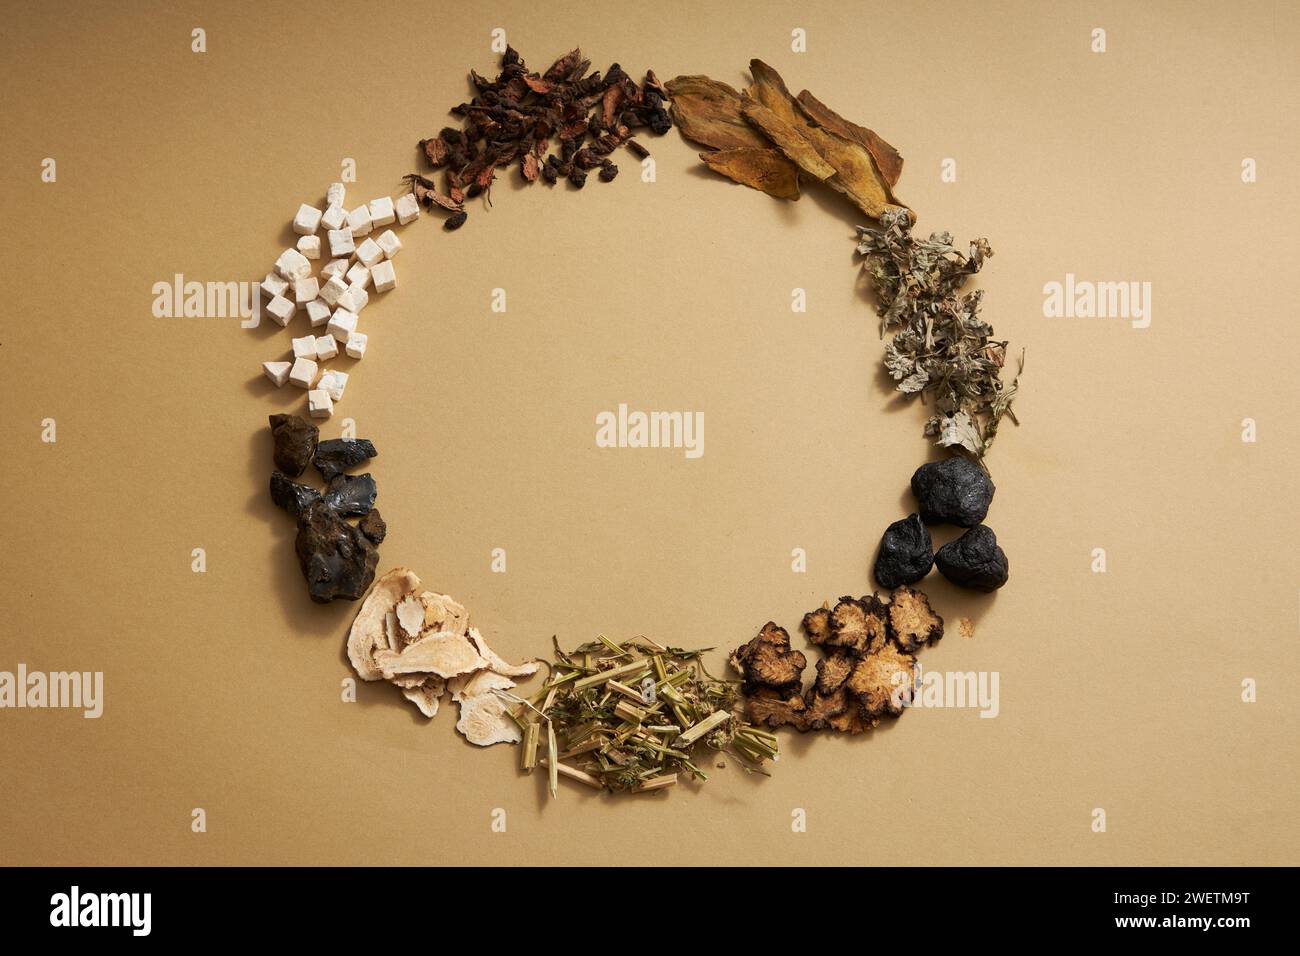 Top view of traditional Chinese medicines arranged in a circle on light brown background. Herbs to help supplement and enhance health. Empty space for Stock Photo